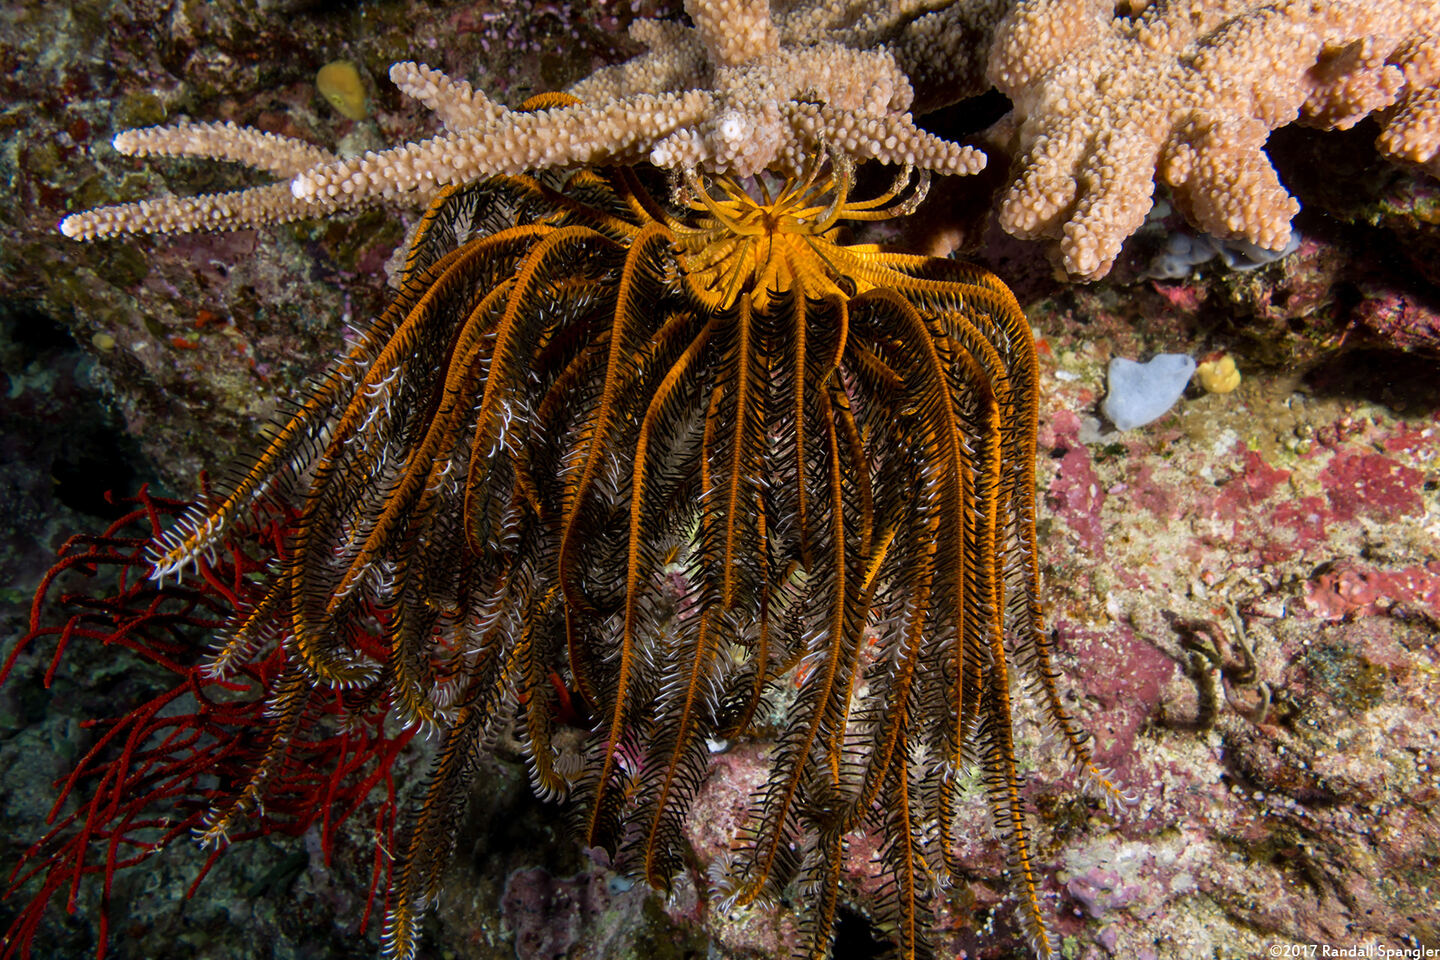 Anneissia bennetti (Bennett's Feather Star); Underside of the feather star with its cirri (legs)